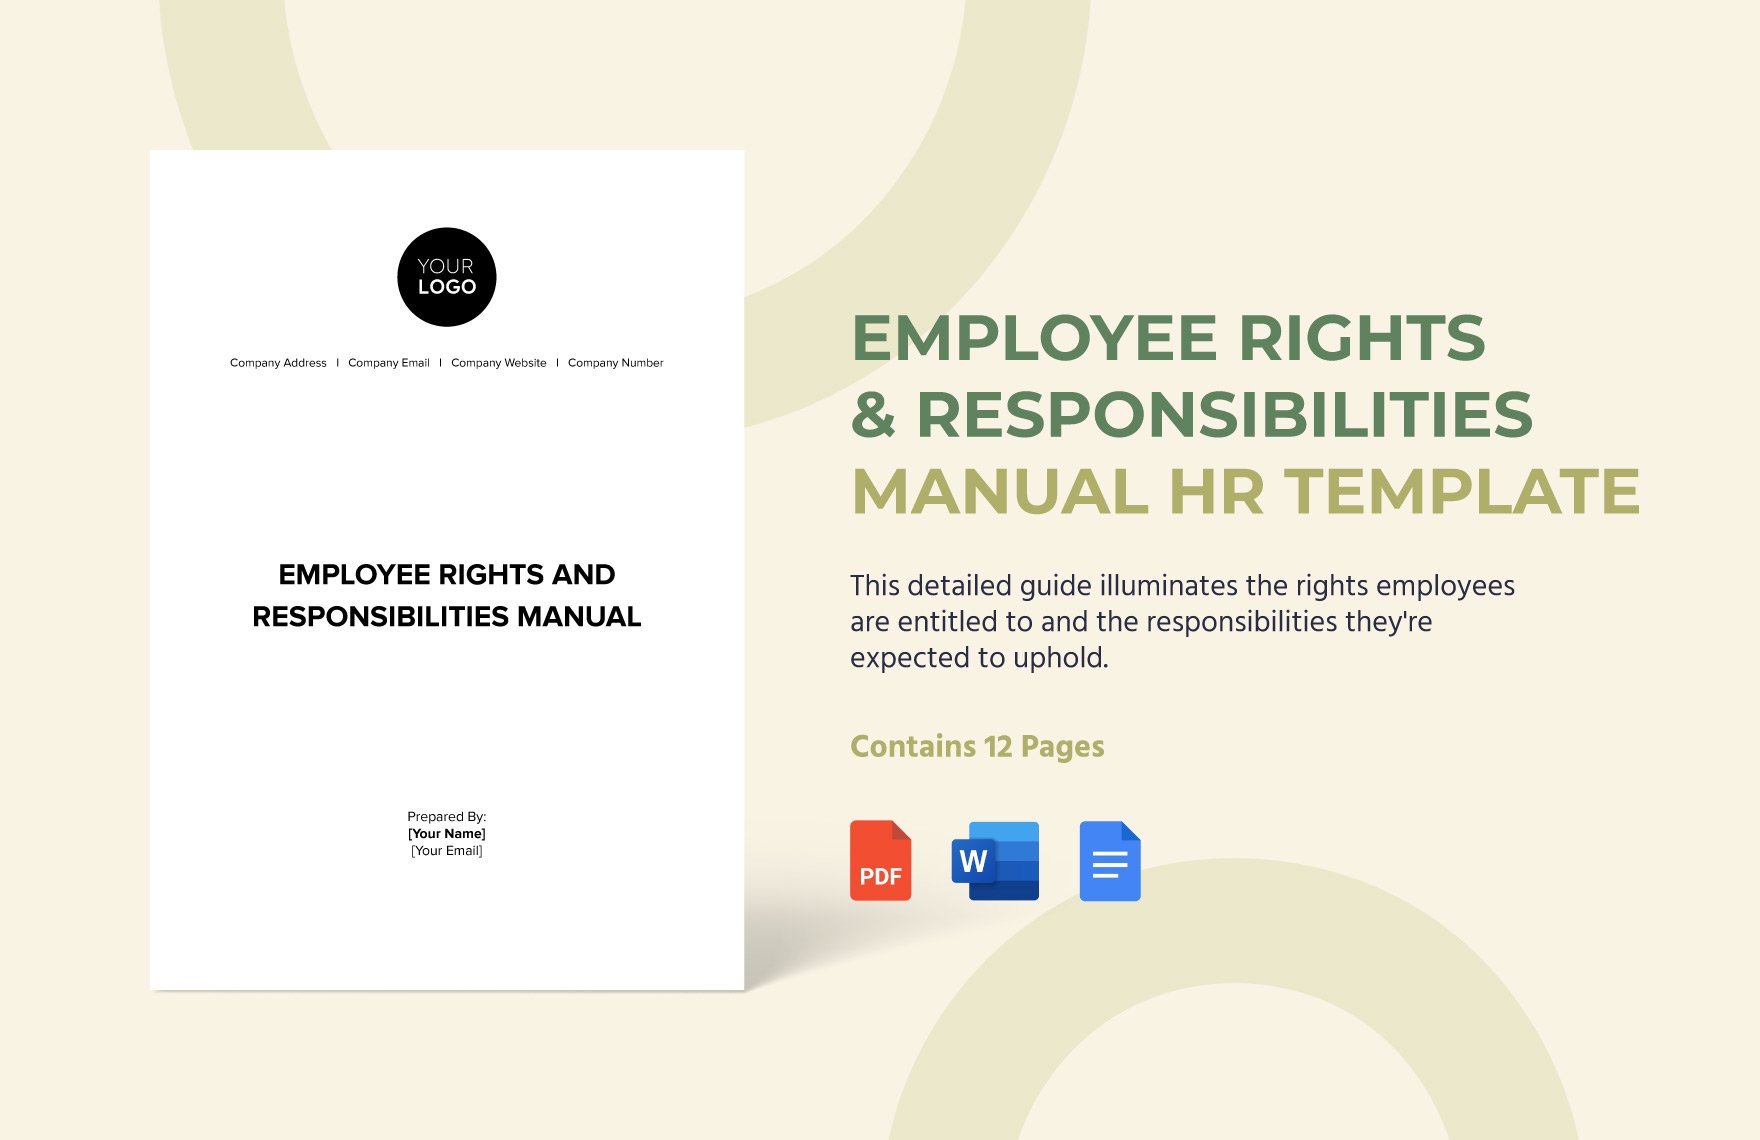 Employee Rights & Responsibilities Manual HR Template